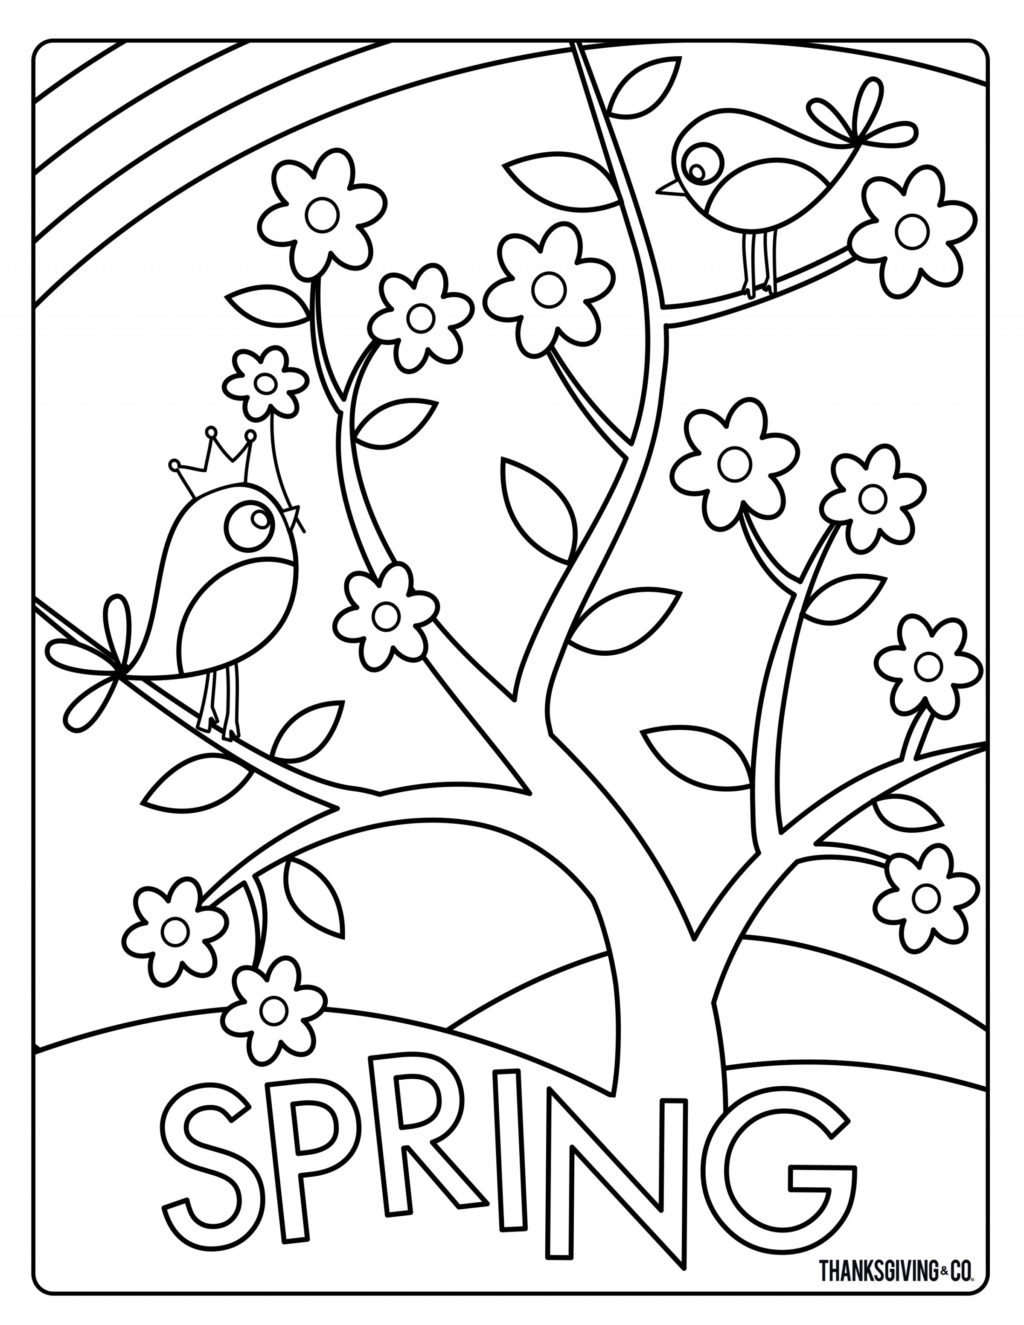 Spring Coloring Pages Coloring Book World Spring Coloring Pages Printable Free For Kids